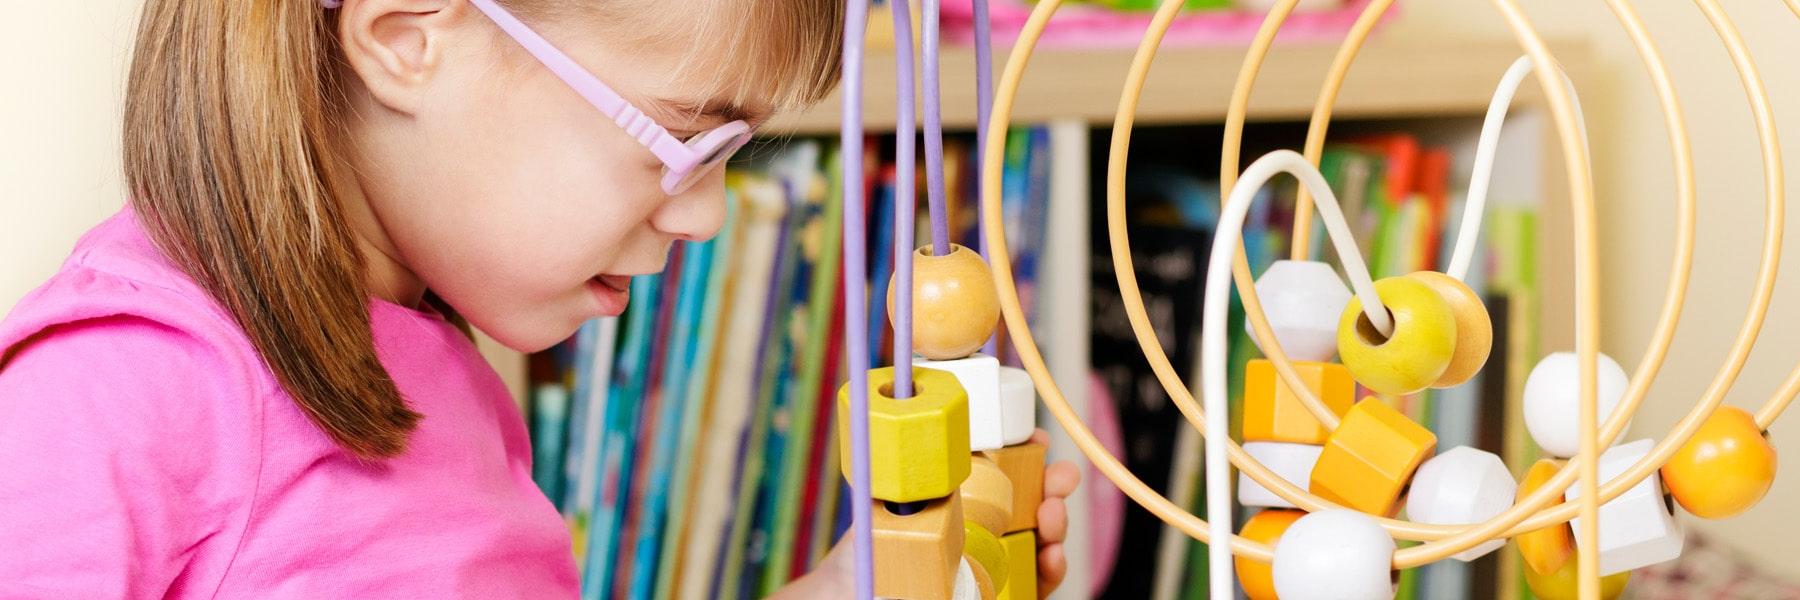 close up of toddler with pink eye glasses and circular abacus toy